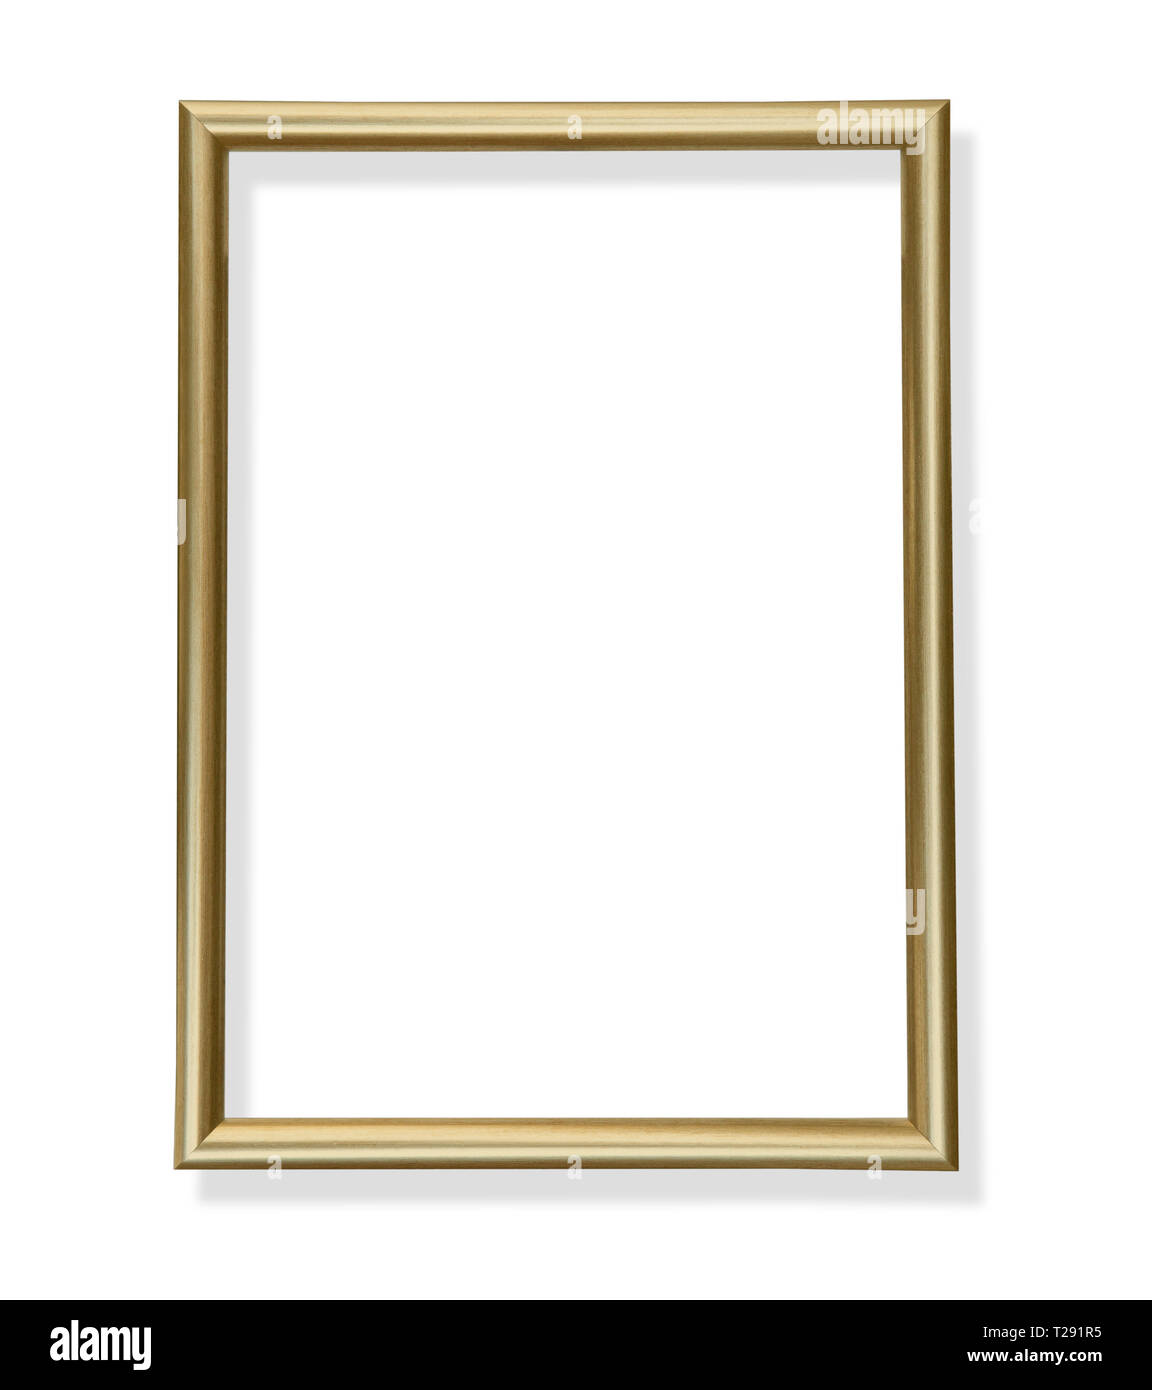 golden modern frame isolated with clipping path Stock Photo - Alamy